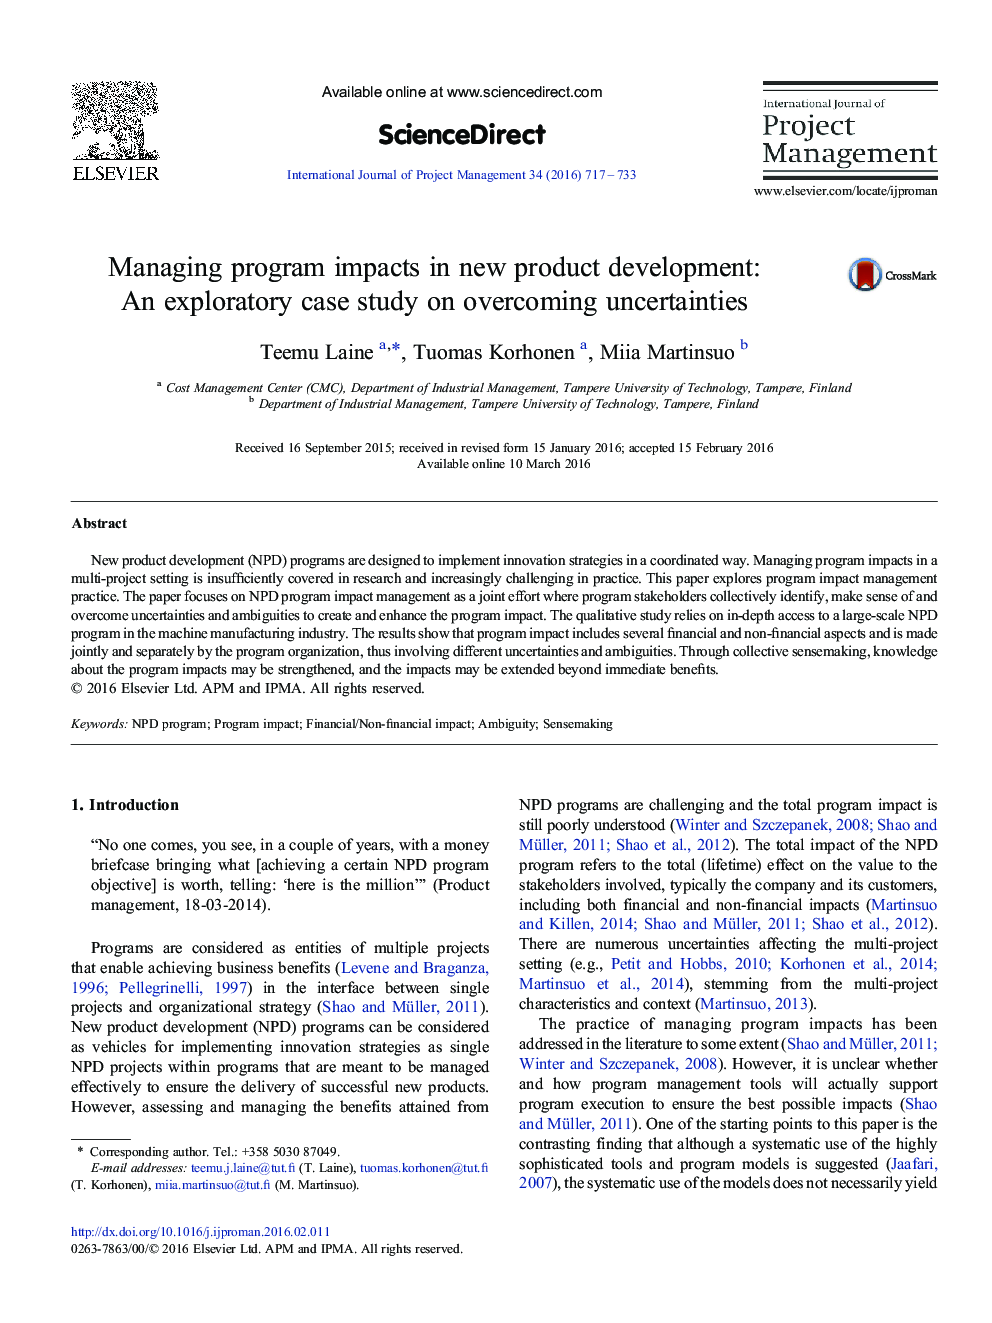 Managing program impacts in new product development: An exploratory case study on overcoming uncertainties